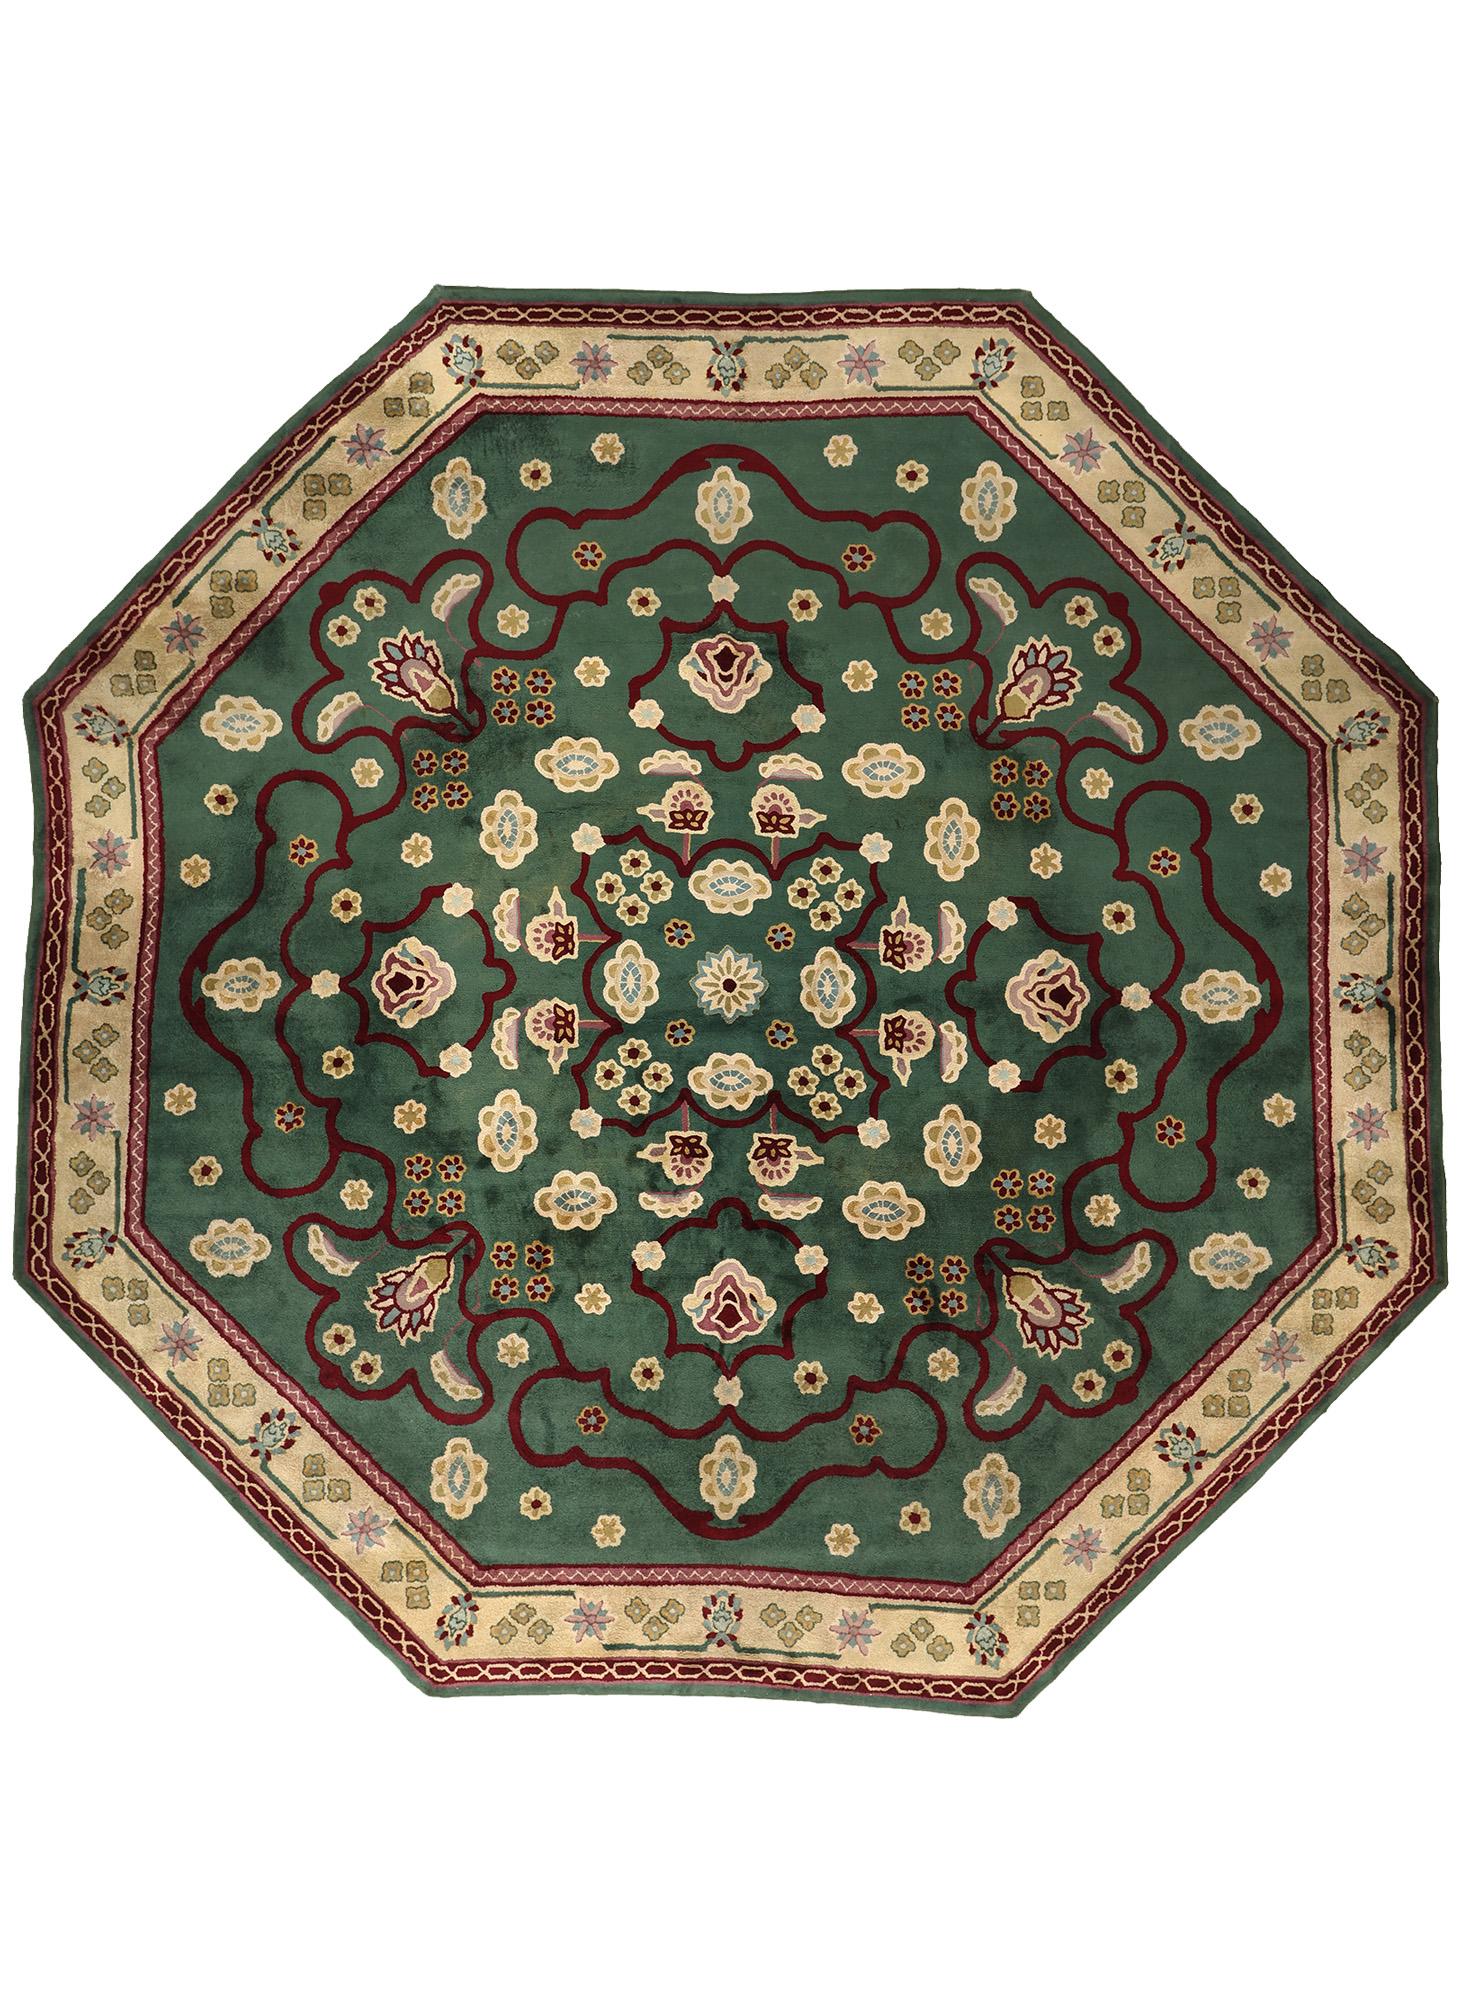 20th Century Vintage Oversize Octagon Edward Fields Rug with Regal Old World Style For Sale